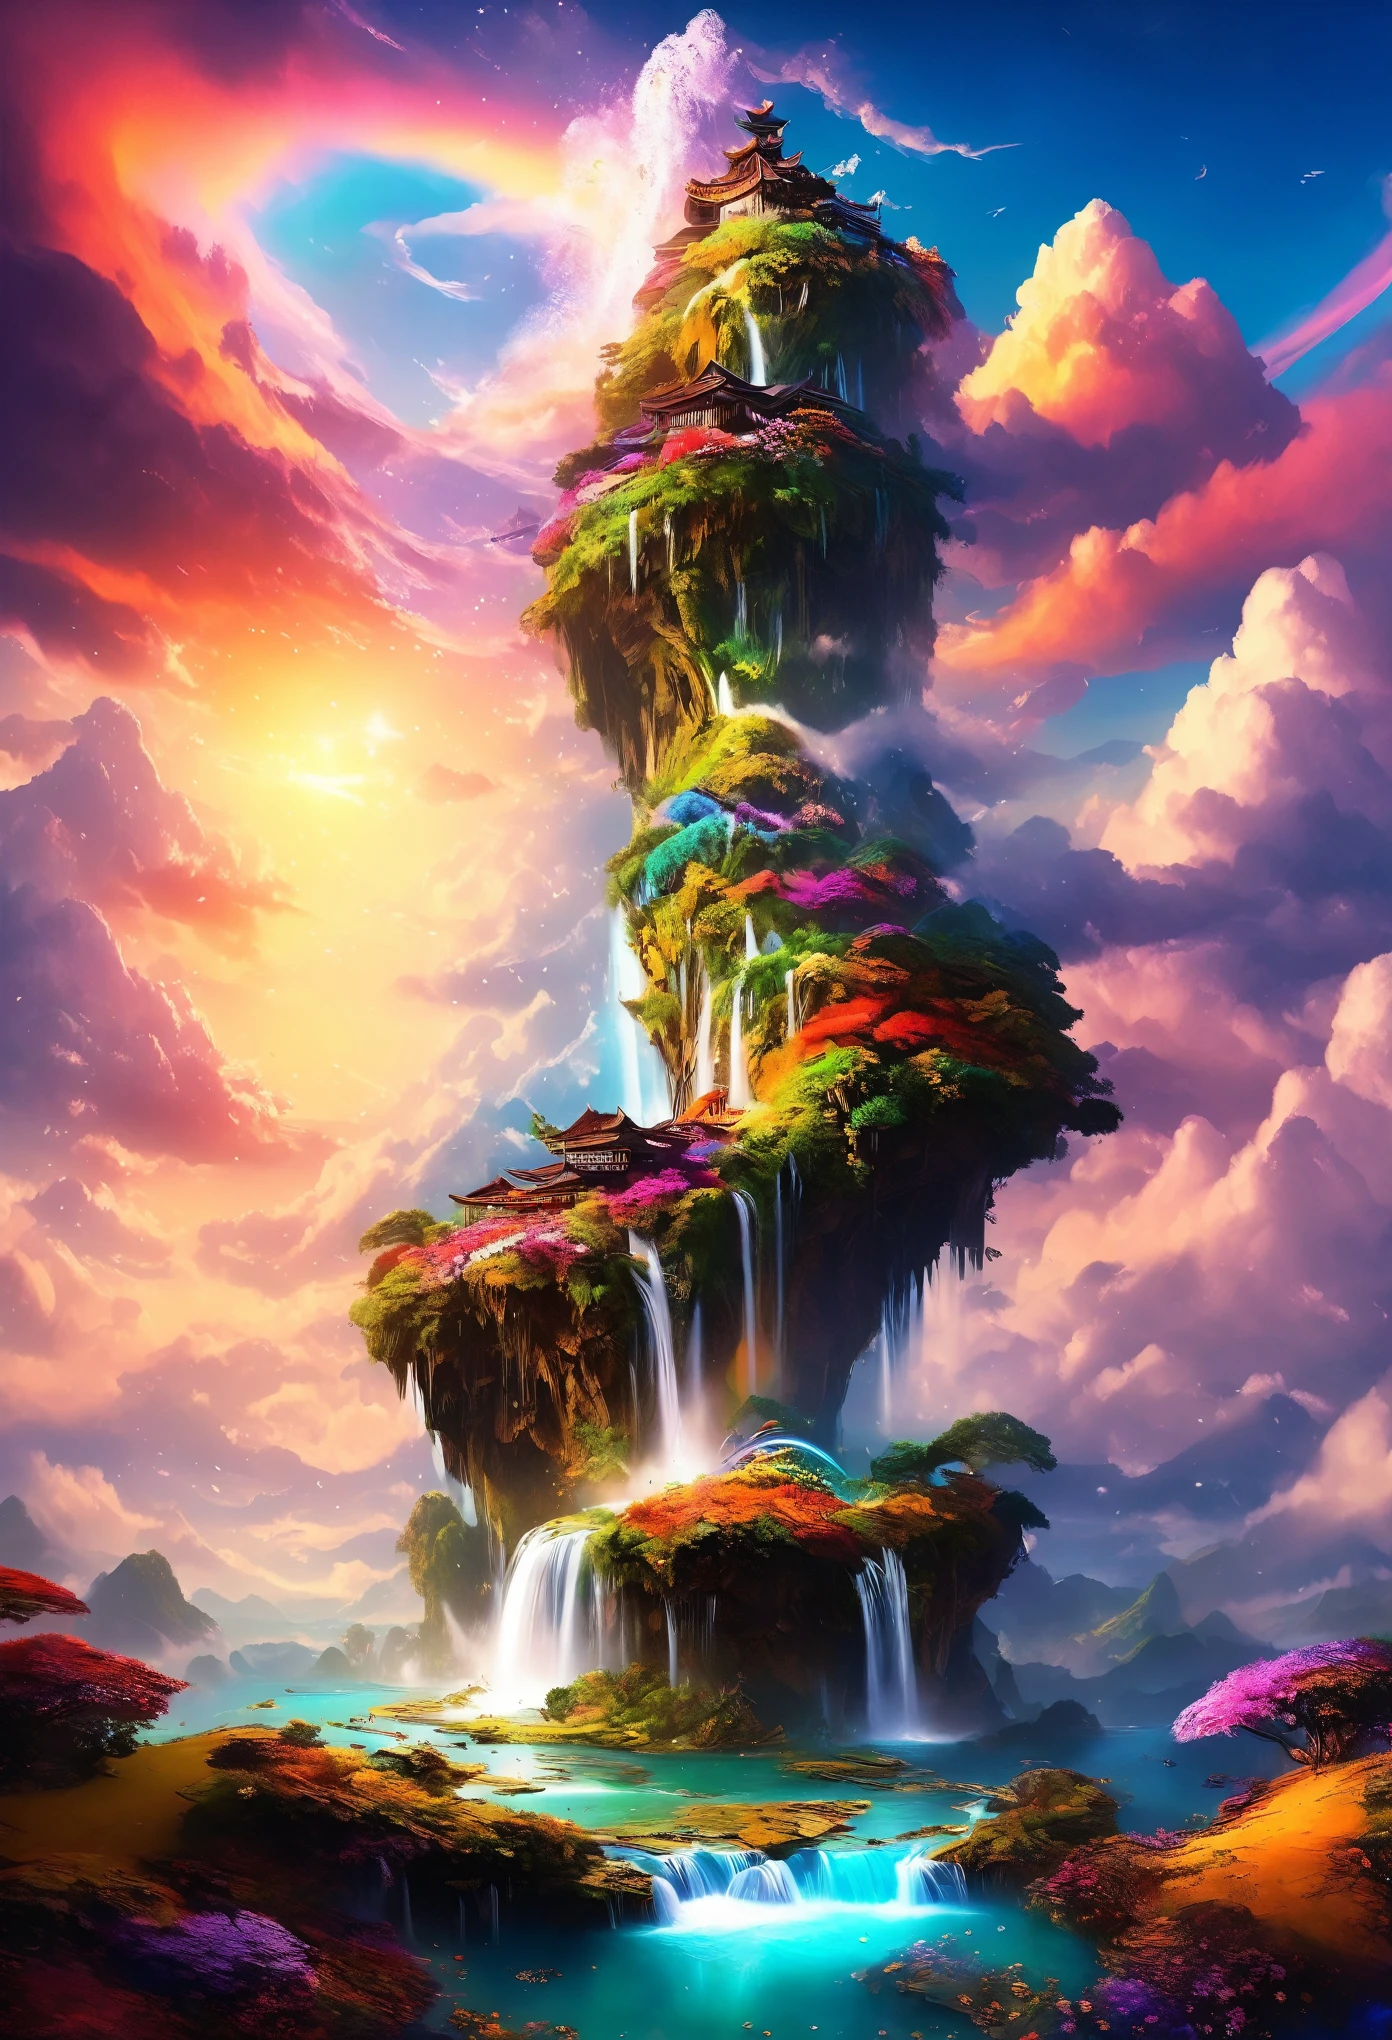 artwork, highest quality, Better Quality, Flying Island, Waterfall cascading down from the island, Fantasy World, Magnificent panorama, Multicolored clouds, Flashy colors,